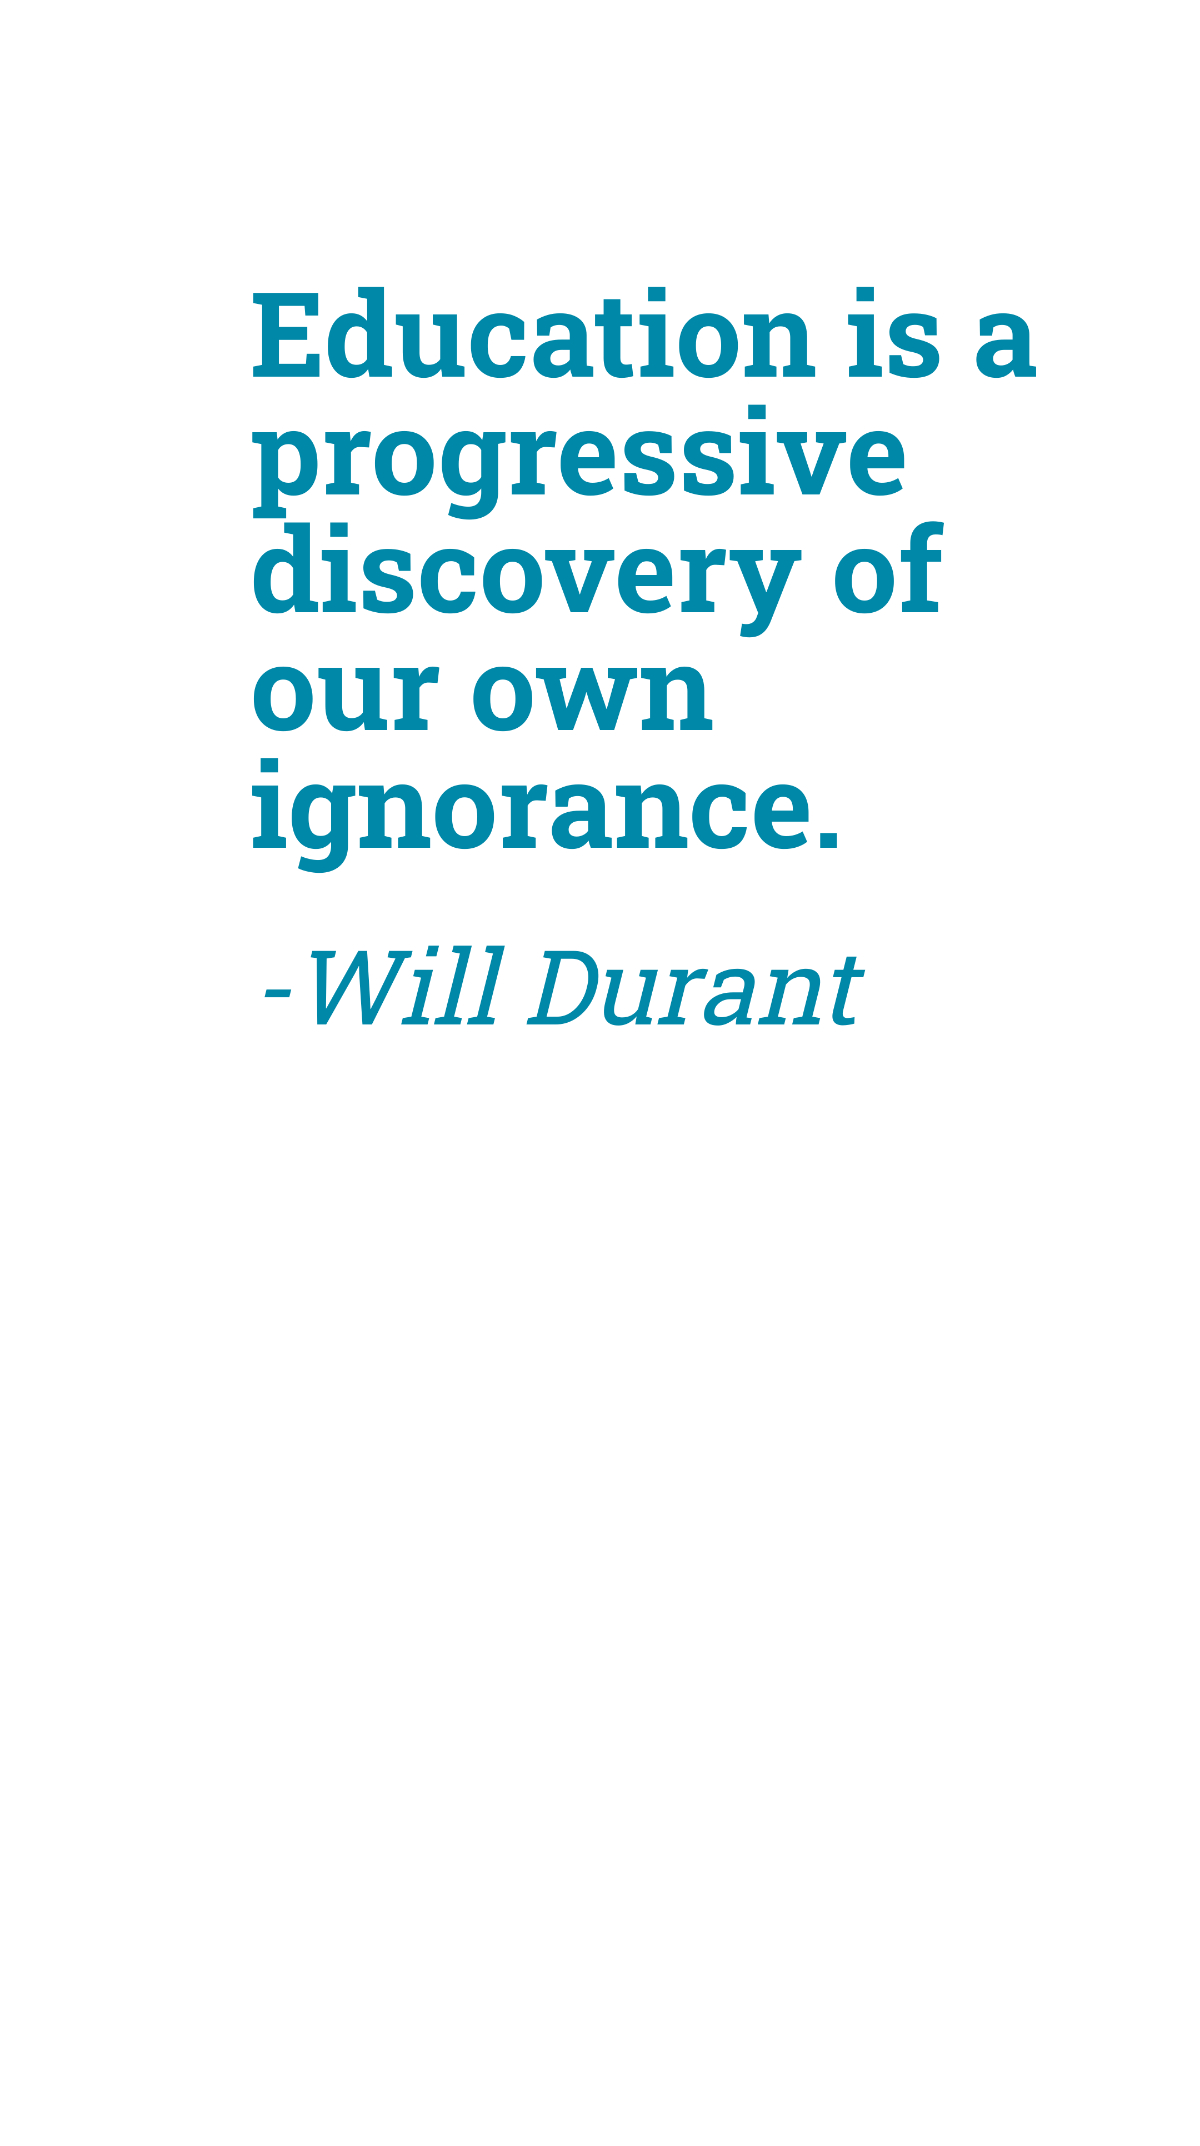 Free Will Durant - Education is a progressive discovery of our own ignorance. Template